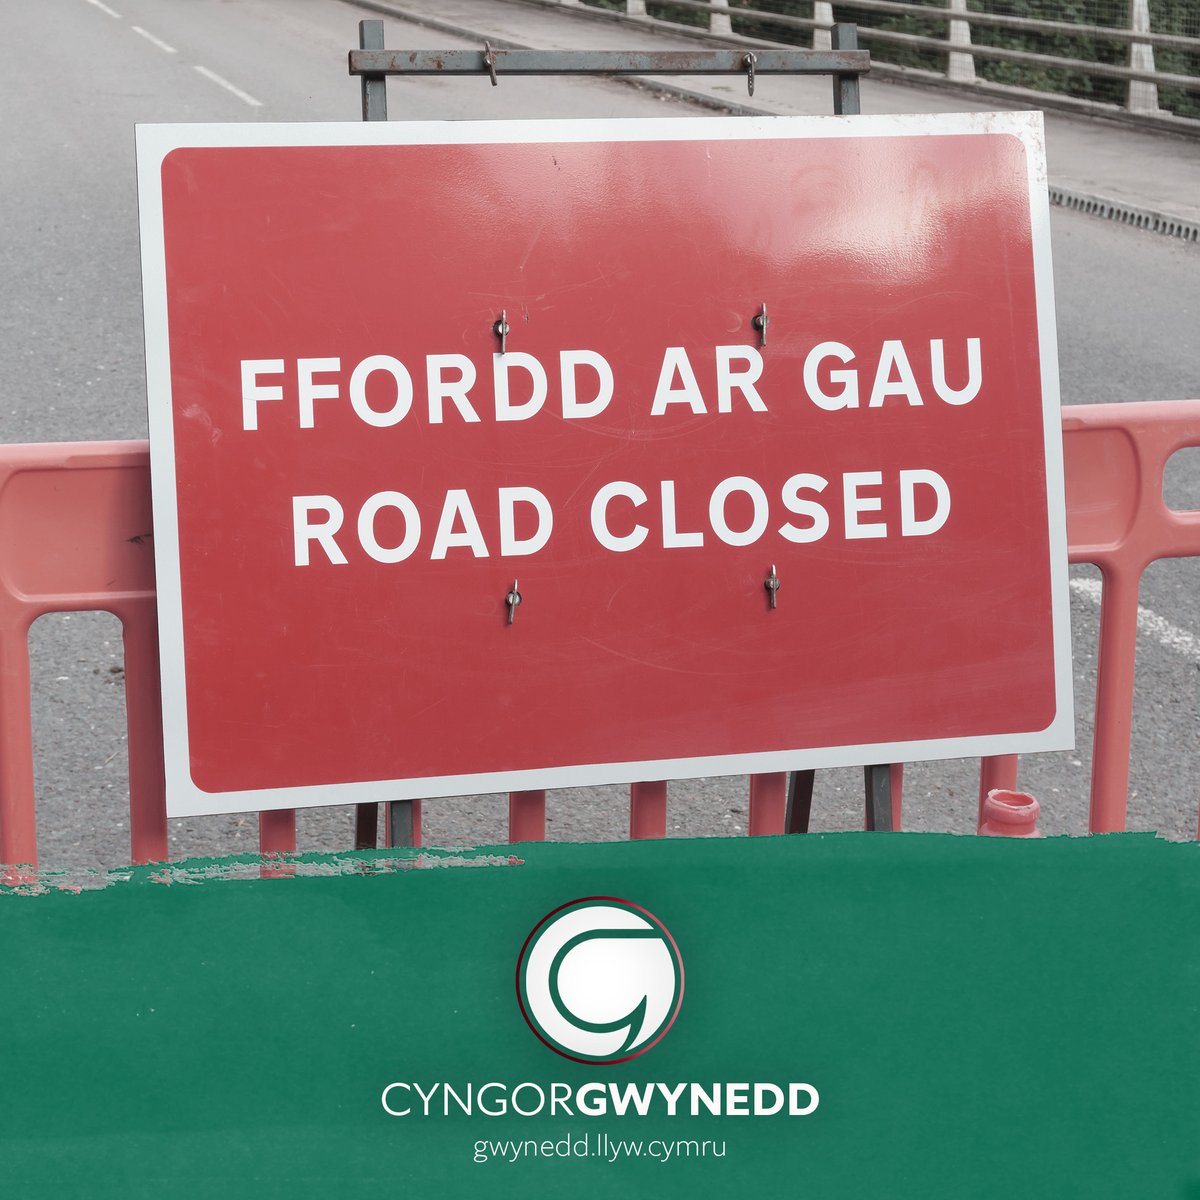 Notice- Road Closure Garth Road, Bangor near the pier car park will be closed between 9:00-19:00 on 19 May for the Bangor Pier Celebration. Signs will be in place to inform road users